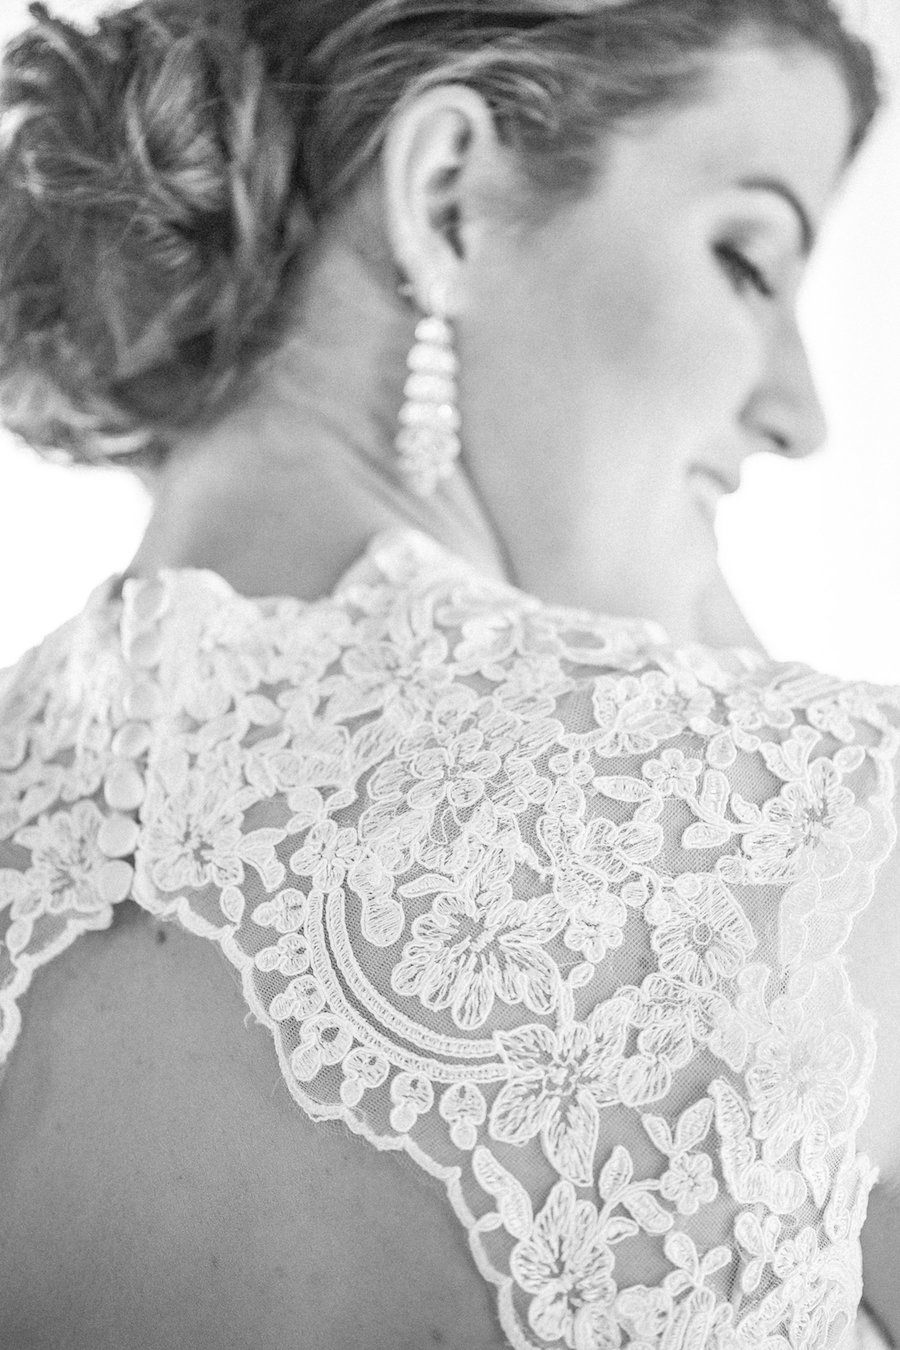 Lace Allure Romance Bridal Gown Wedding Dress Back Detail | Tampa Wedding Photographer Rad Red Creative